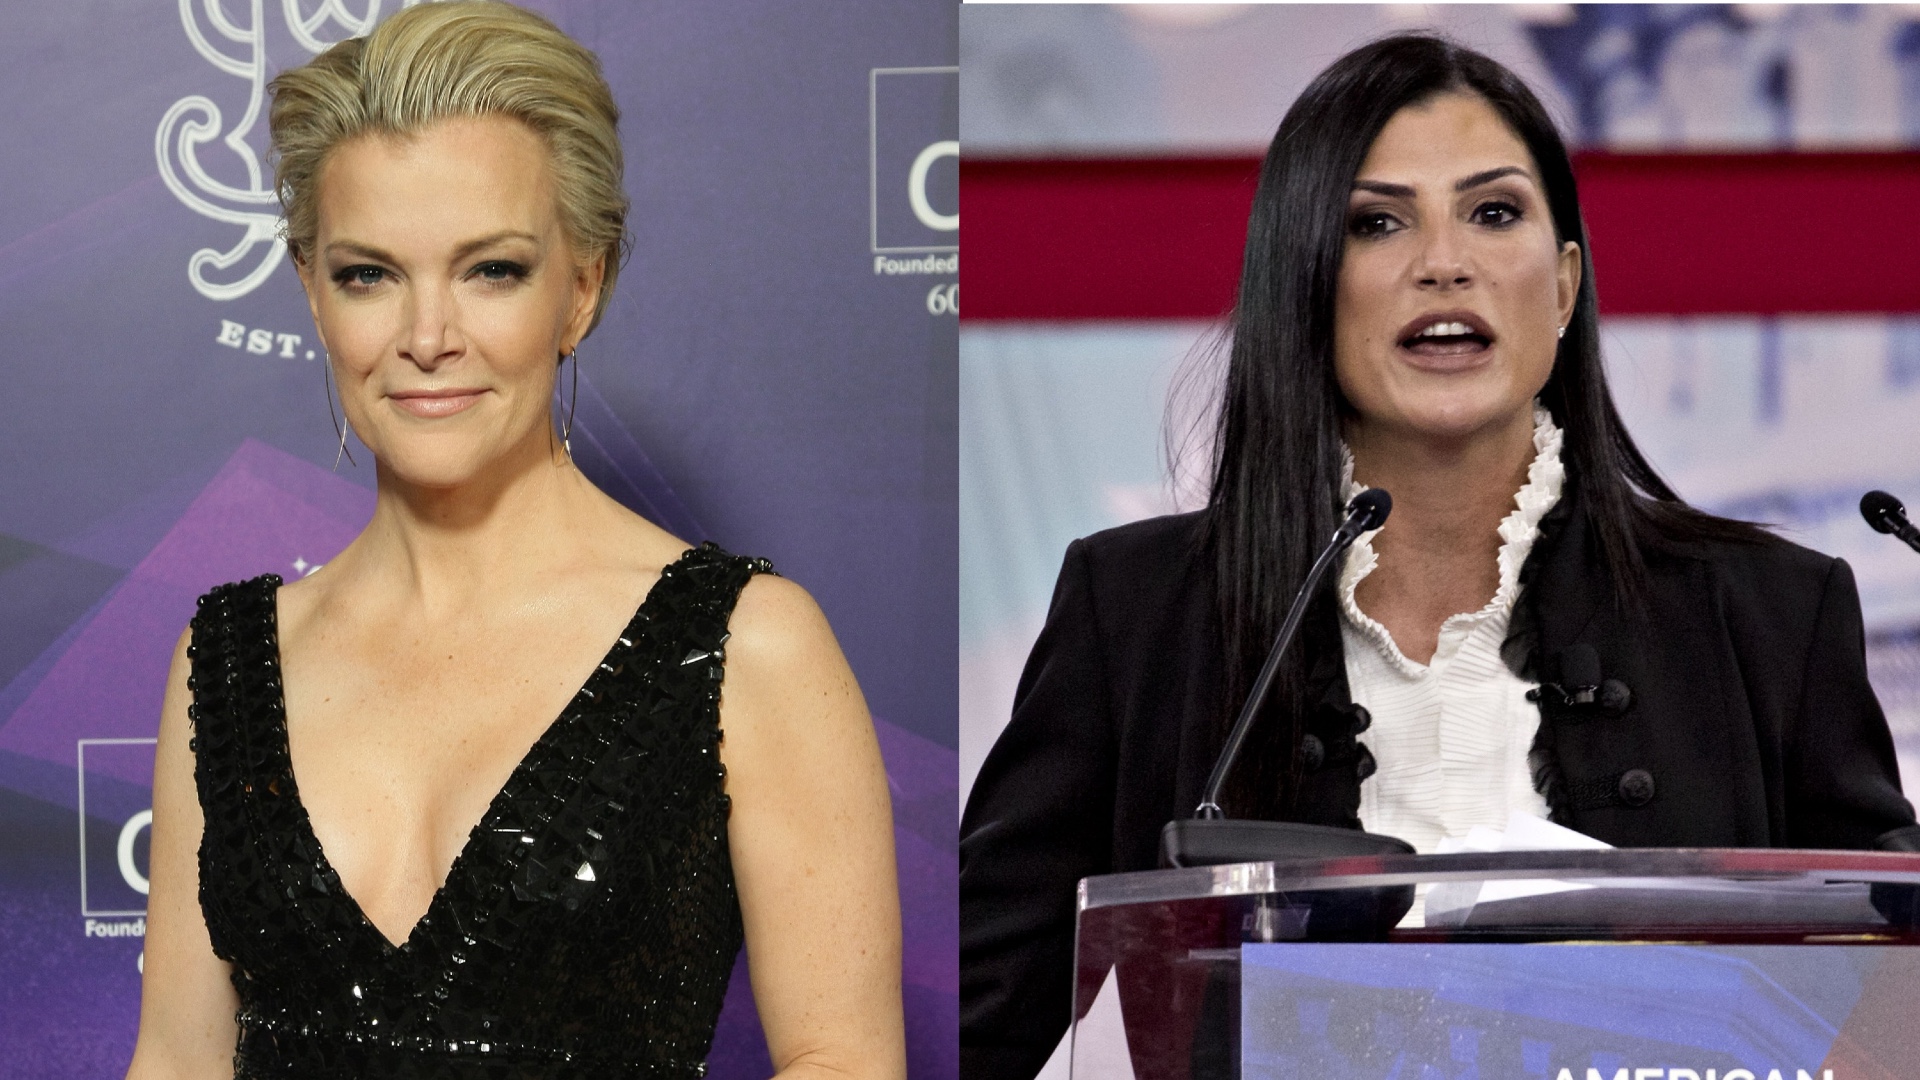 Megyn Kelly, Dana Loesch And Others Label Nashville PD ‘Heroes’